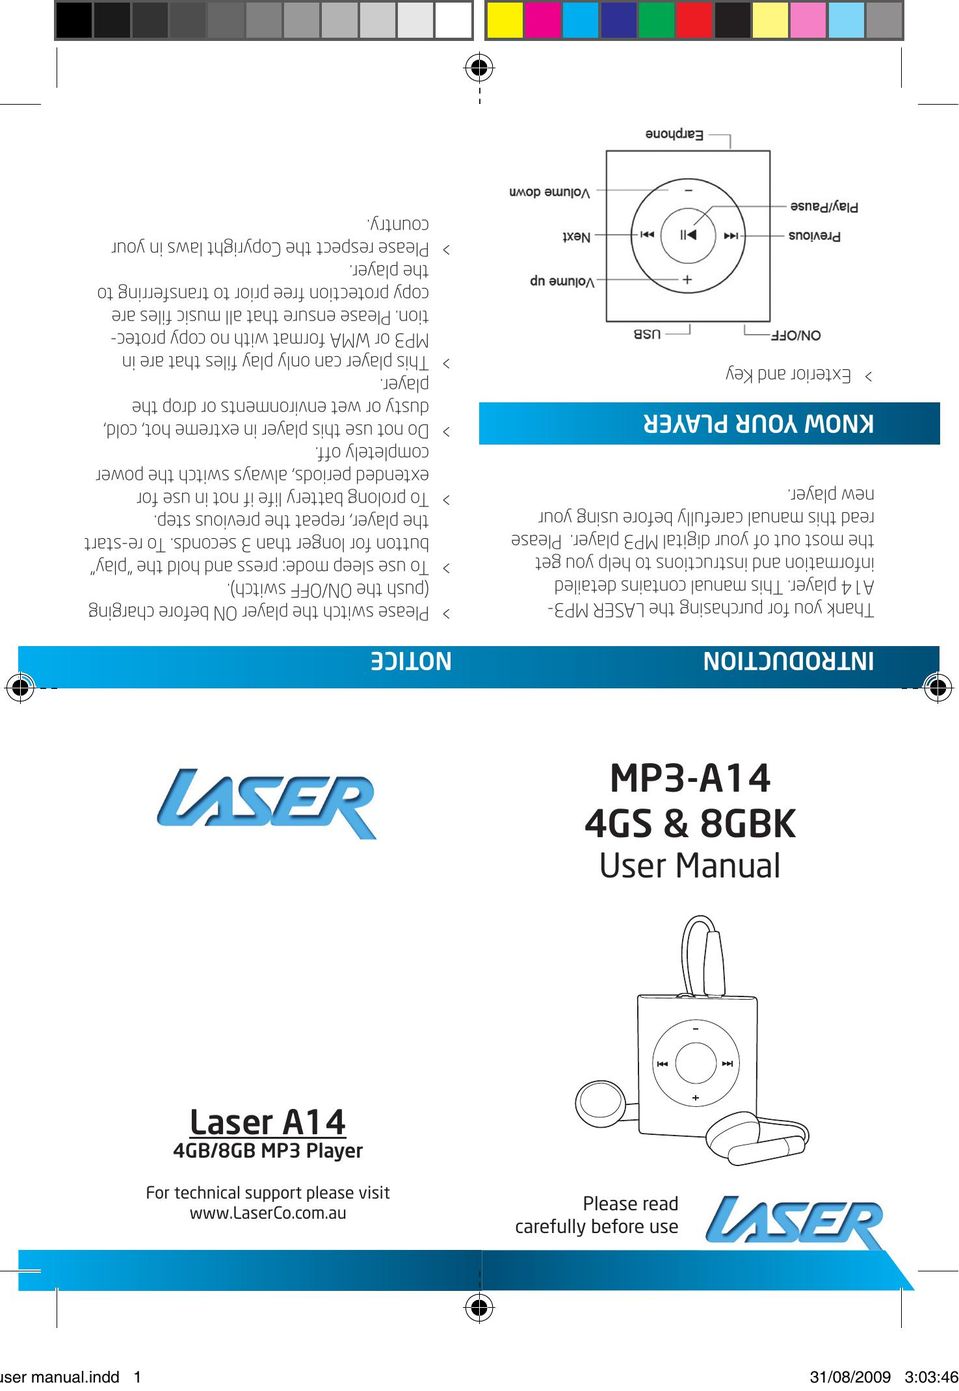 Laser MP3-A14-4GS MP3 Player User Manual